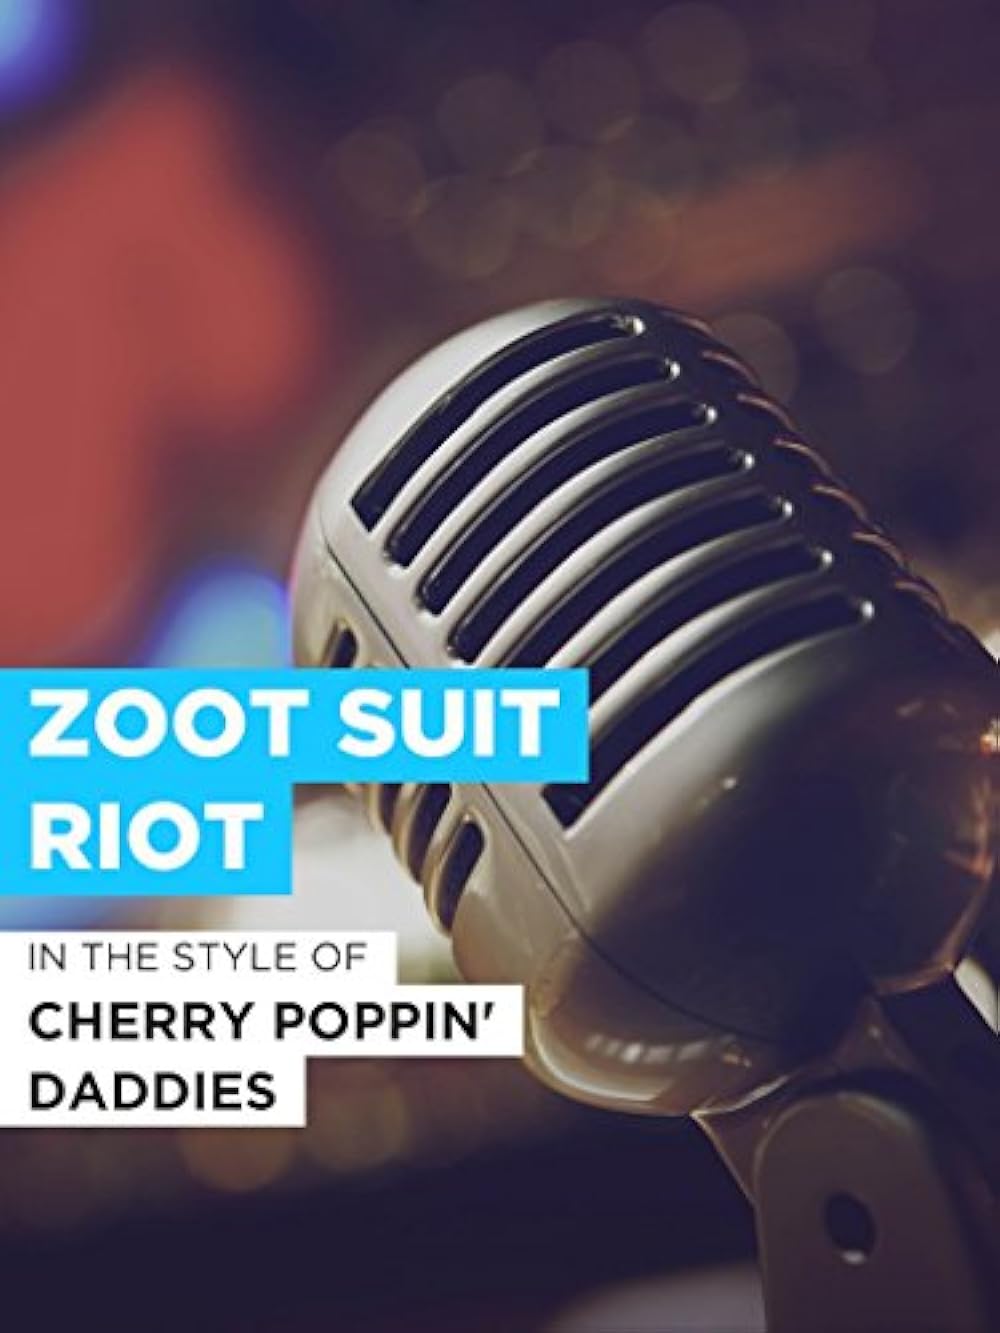 alexis abad recommends Cherry Poppin Pop Star